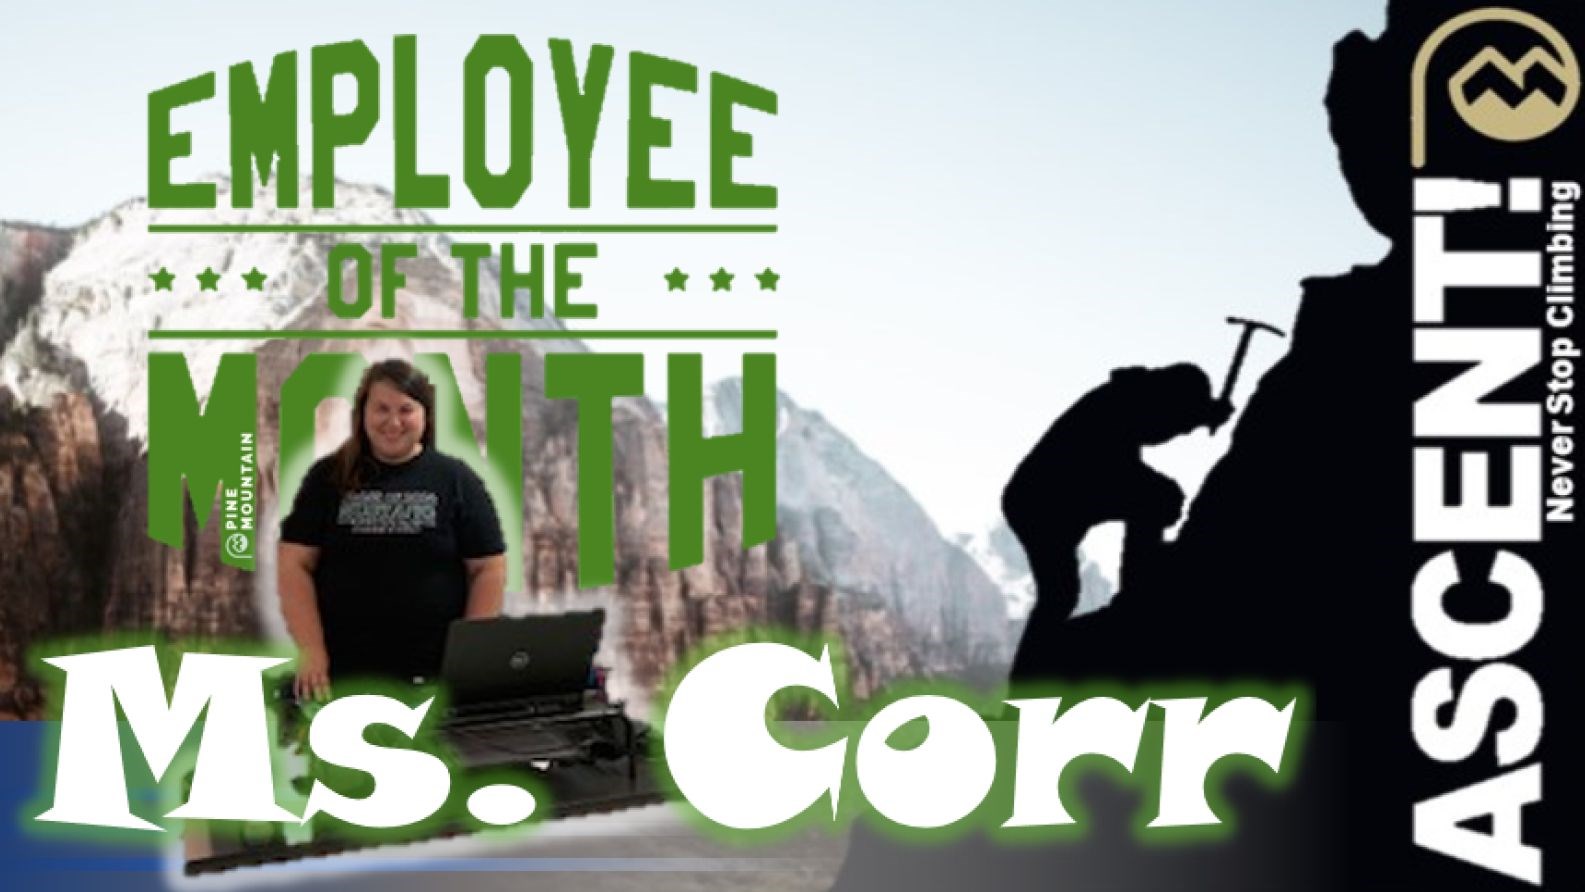 Ms. Corr Employee of the Month